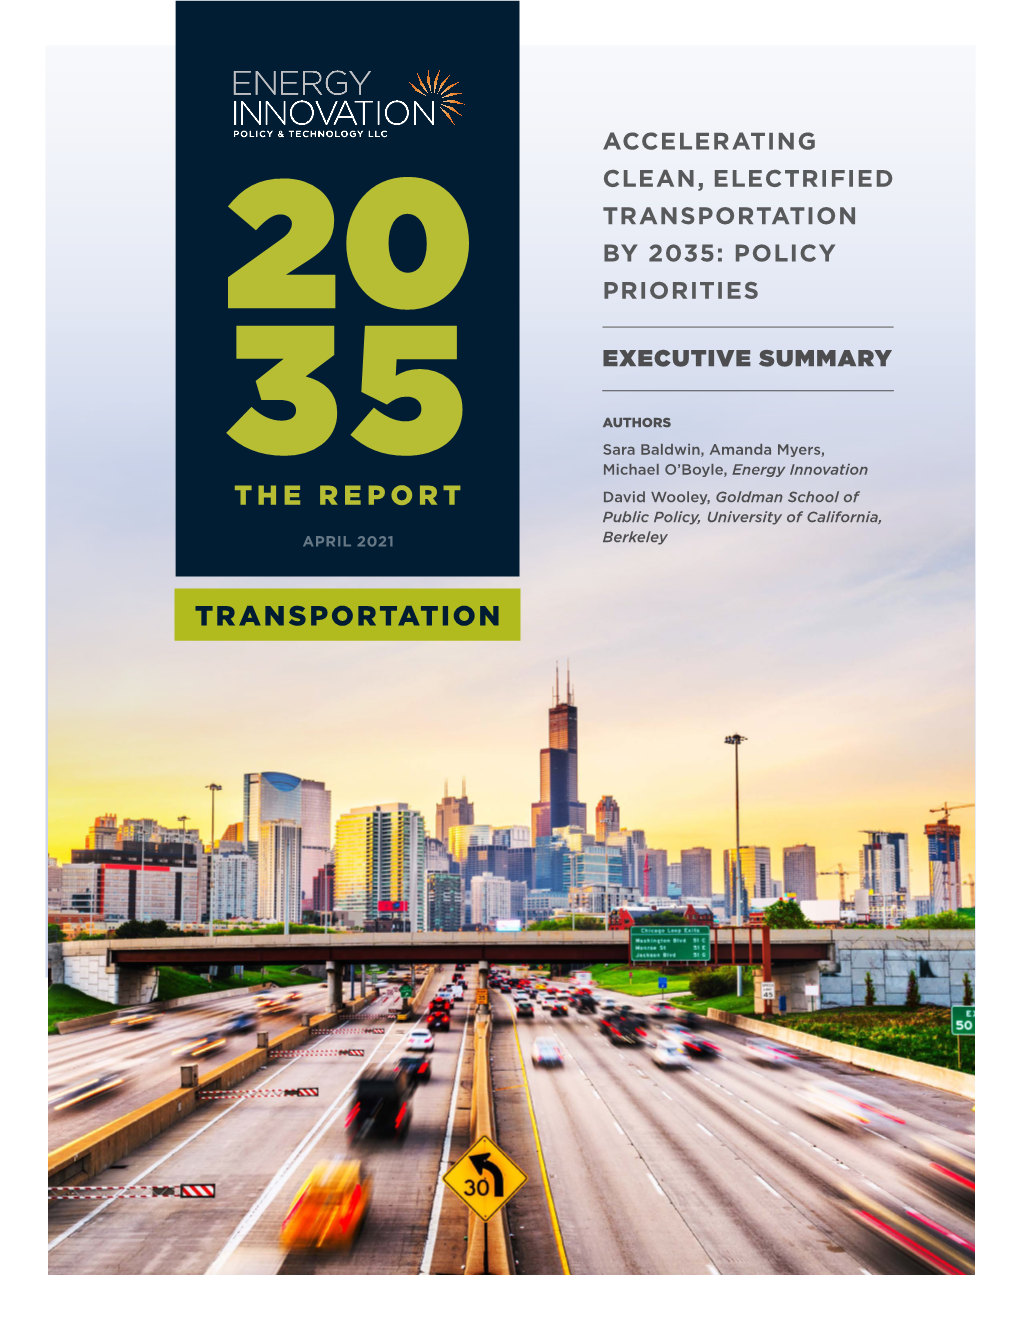 Transportation by 2035: Policy Priorities